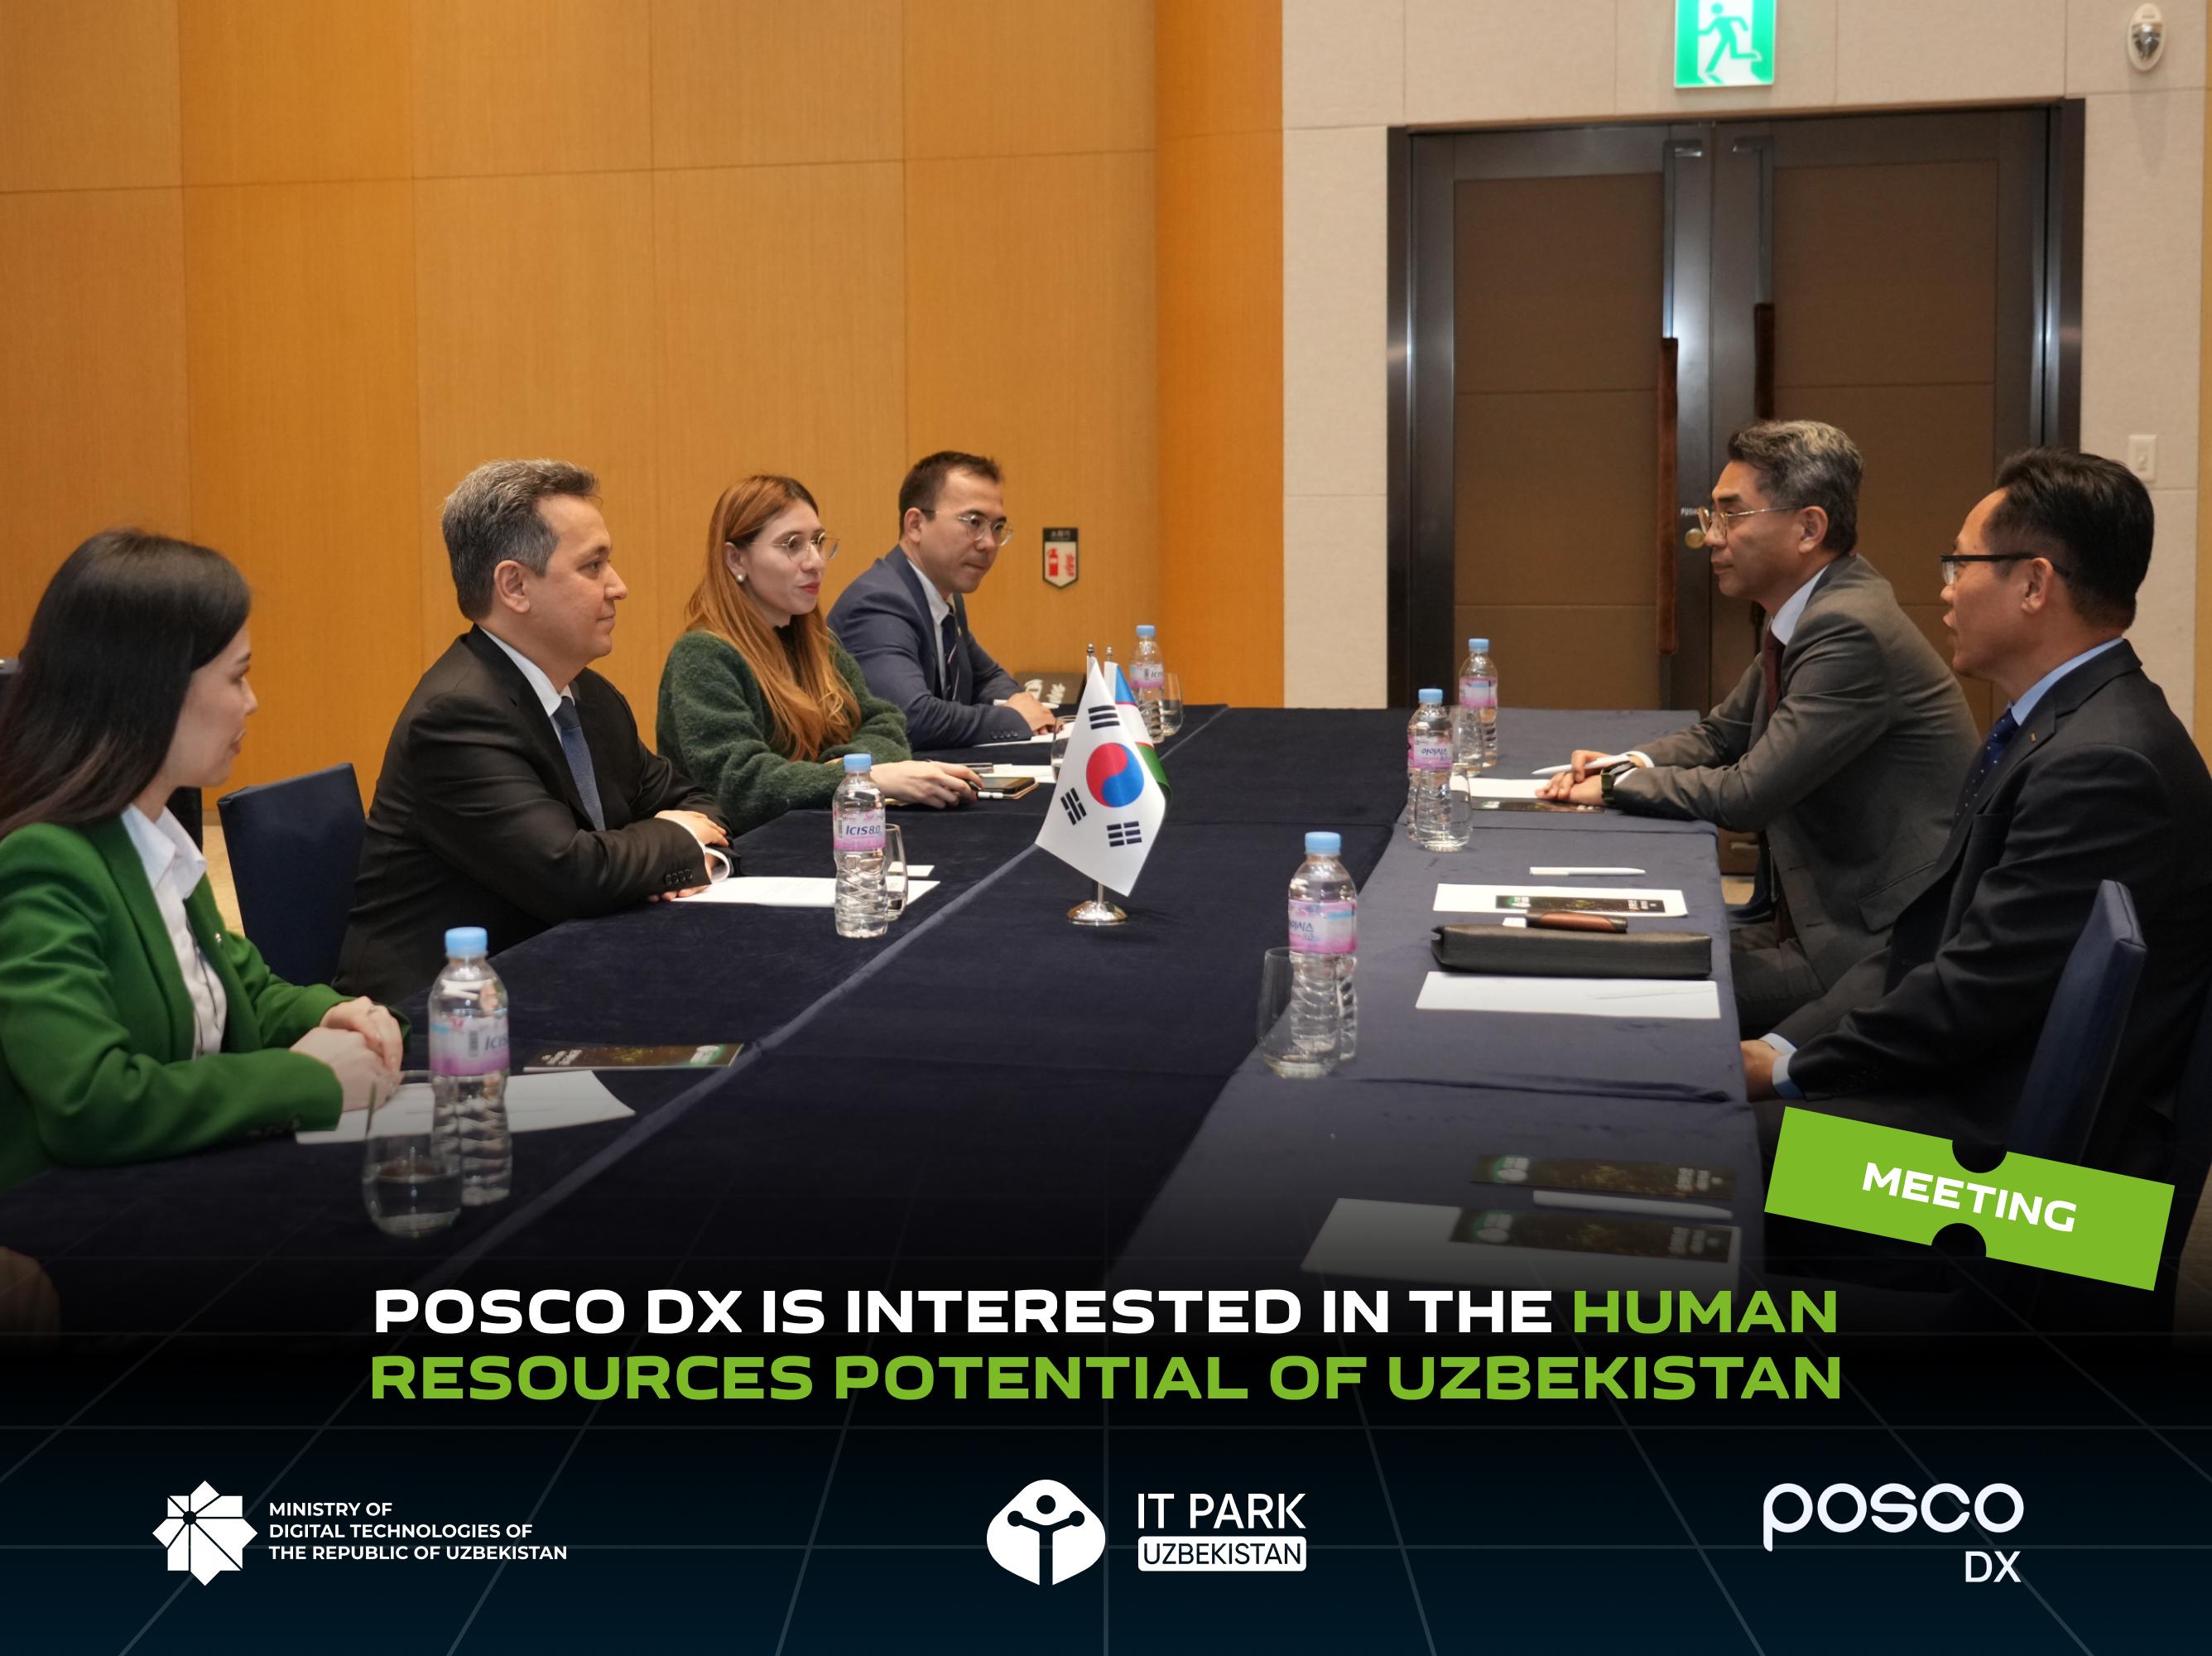 Posco DX is interested in the human resources potential of Uzbekistan